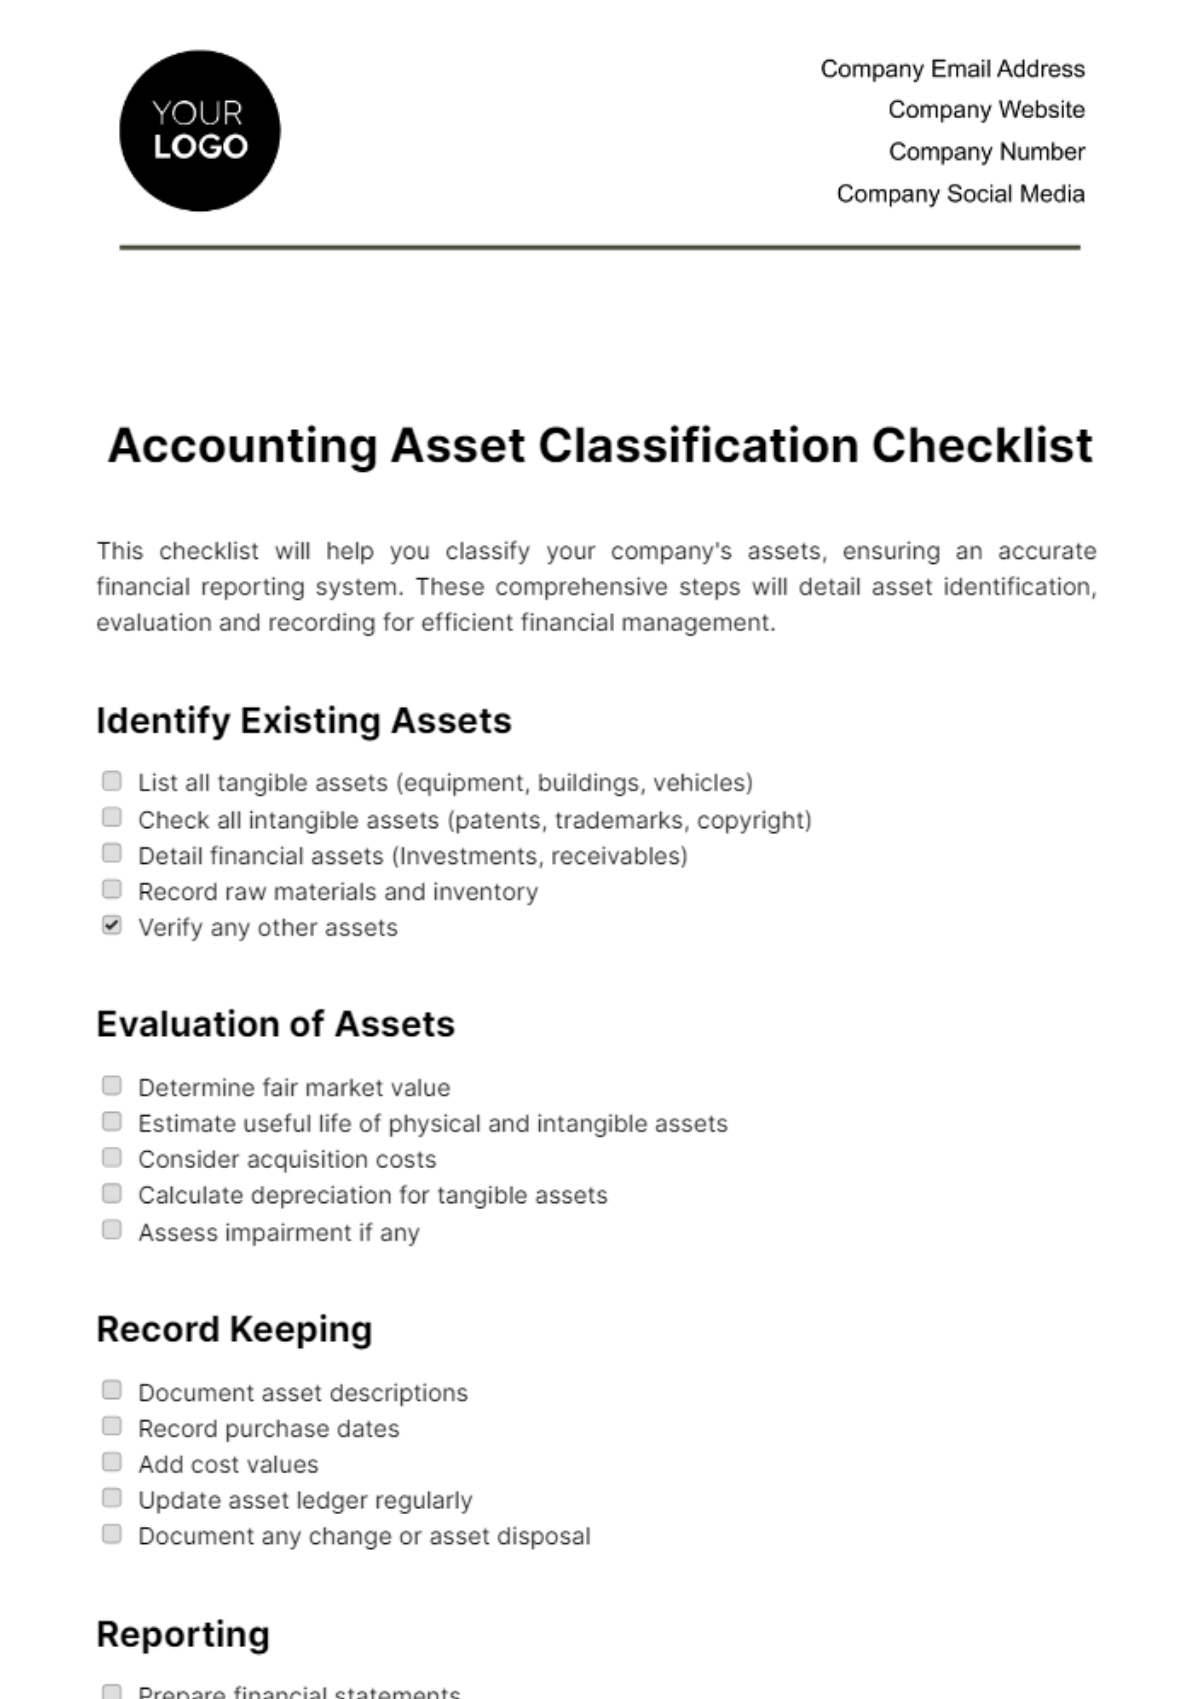 Free Accounting Asset Classification Checklist Template